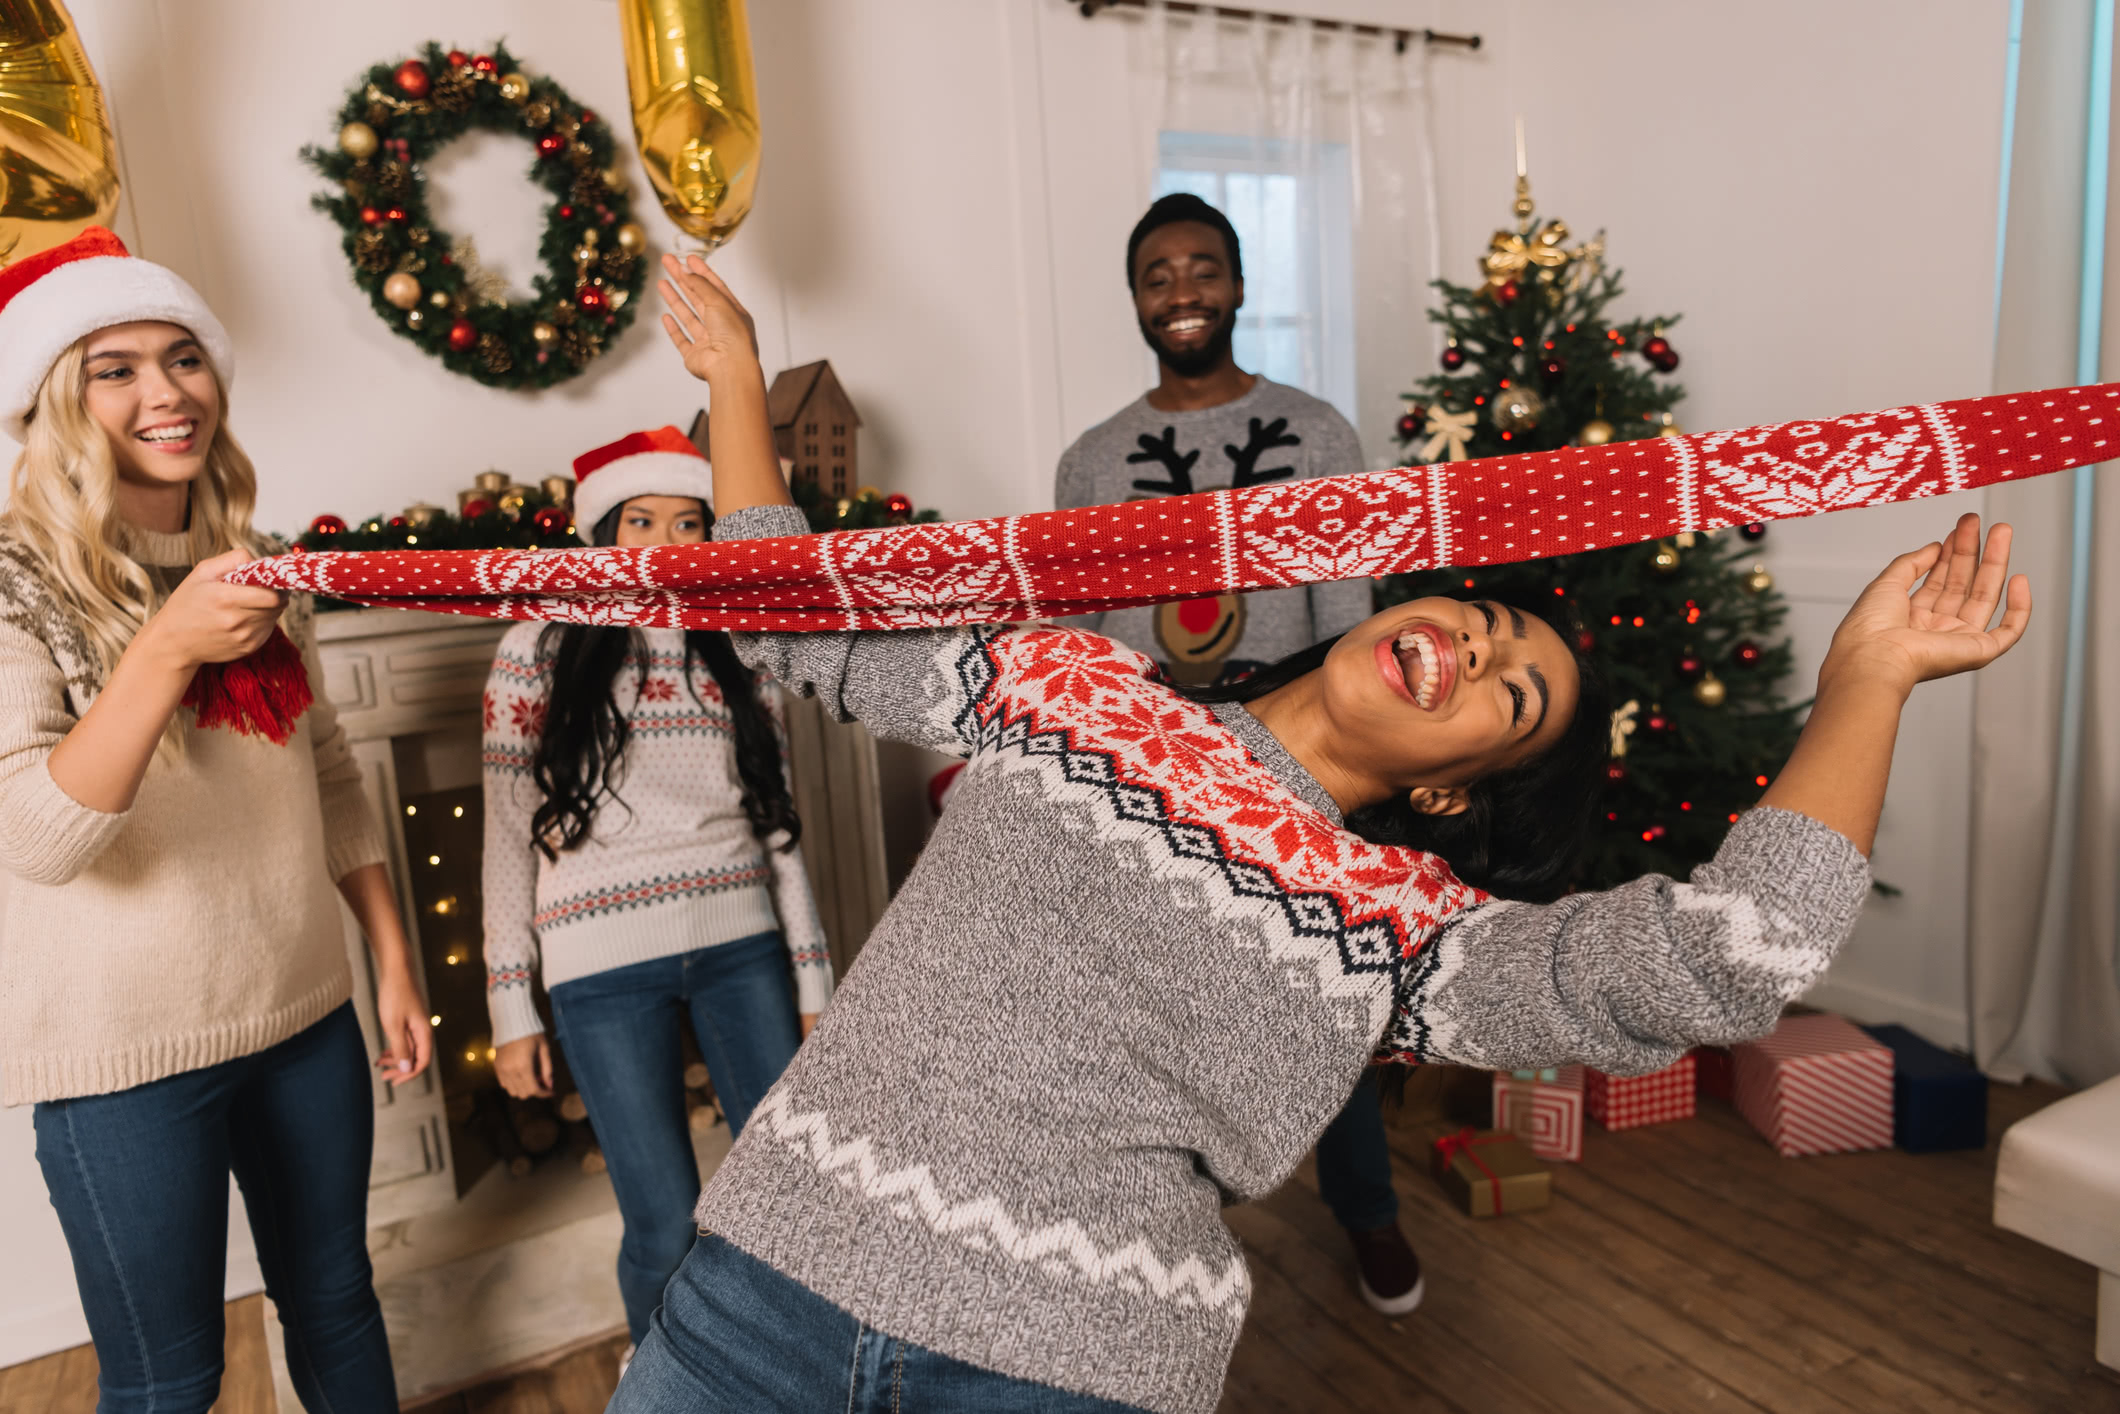 A group of friends playing limbo using a festive red scarf while celebrating christmas together